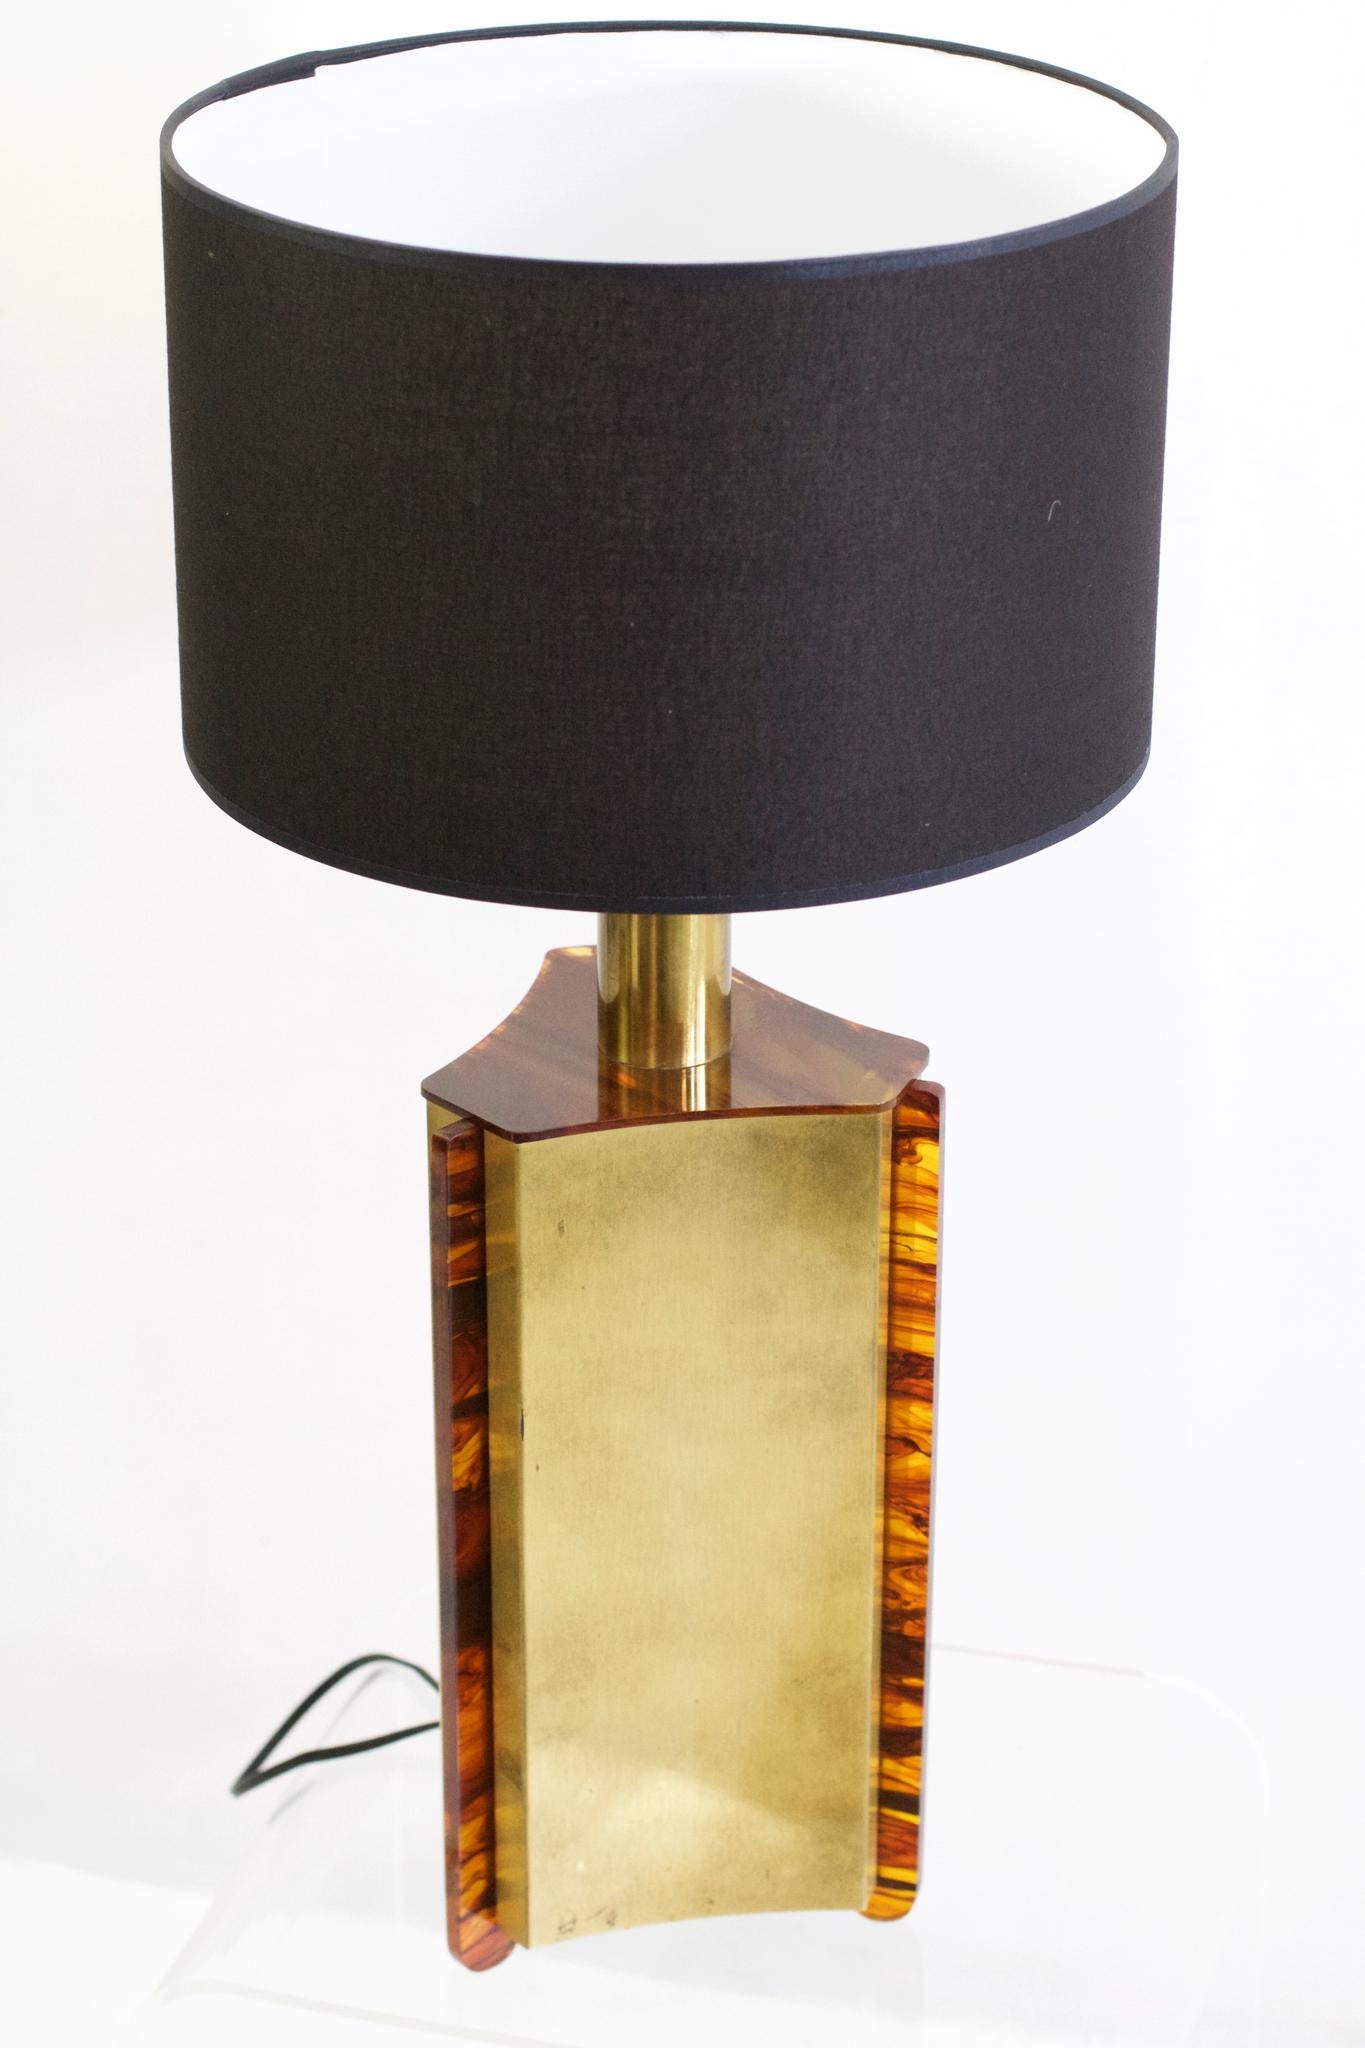 Modern Italian Table Lamp in Faux Tortoise and Brass, 1970s For Sale